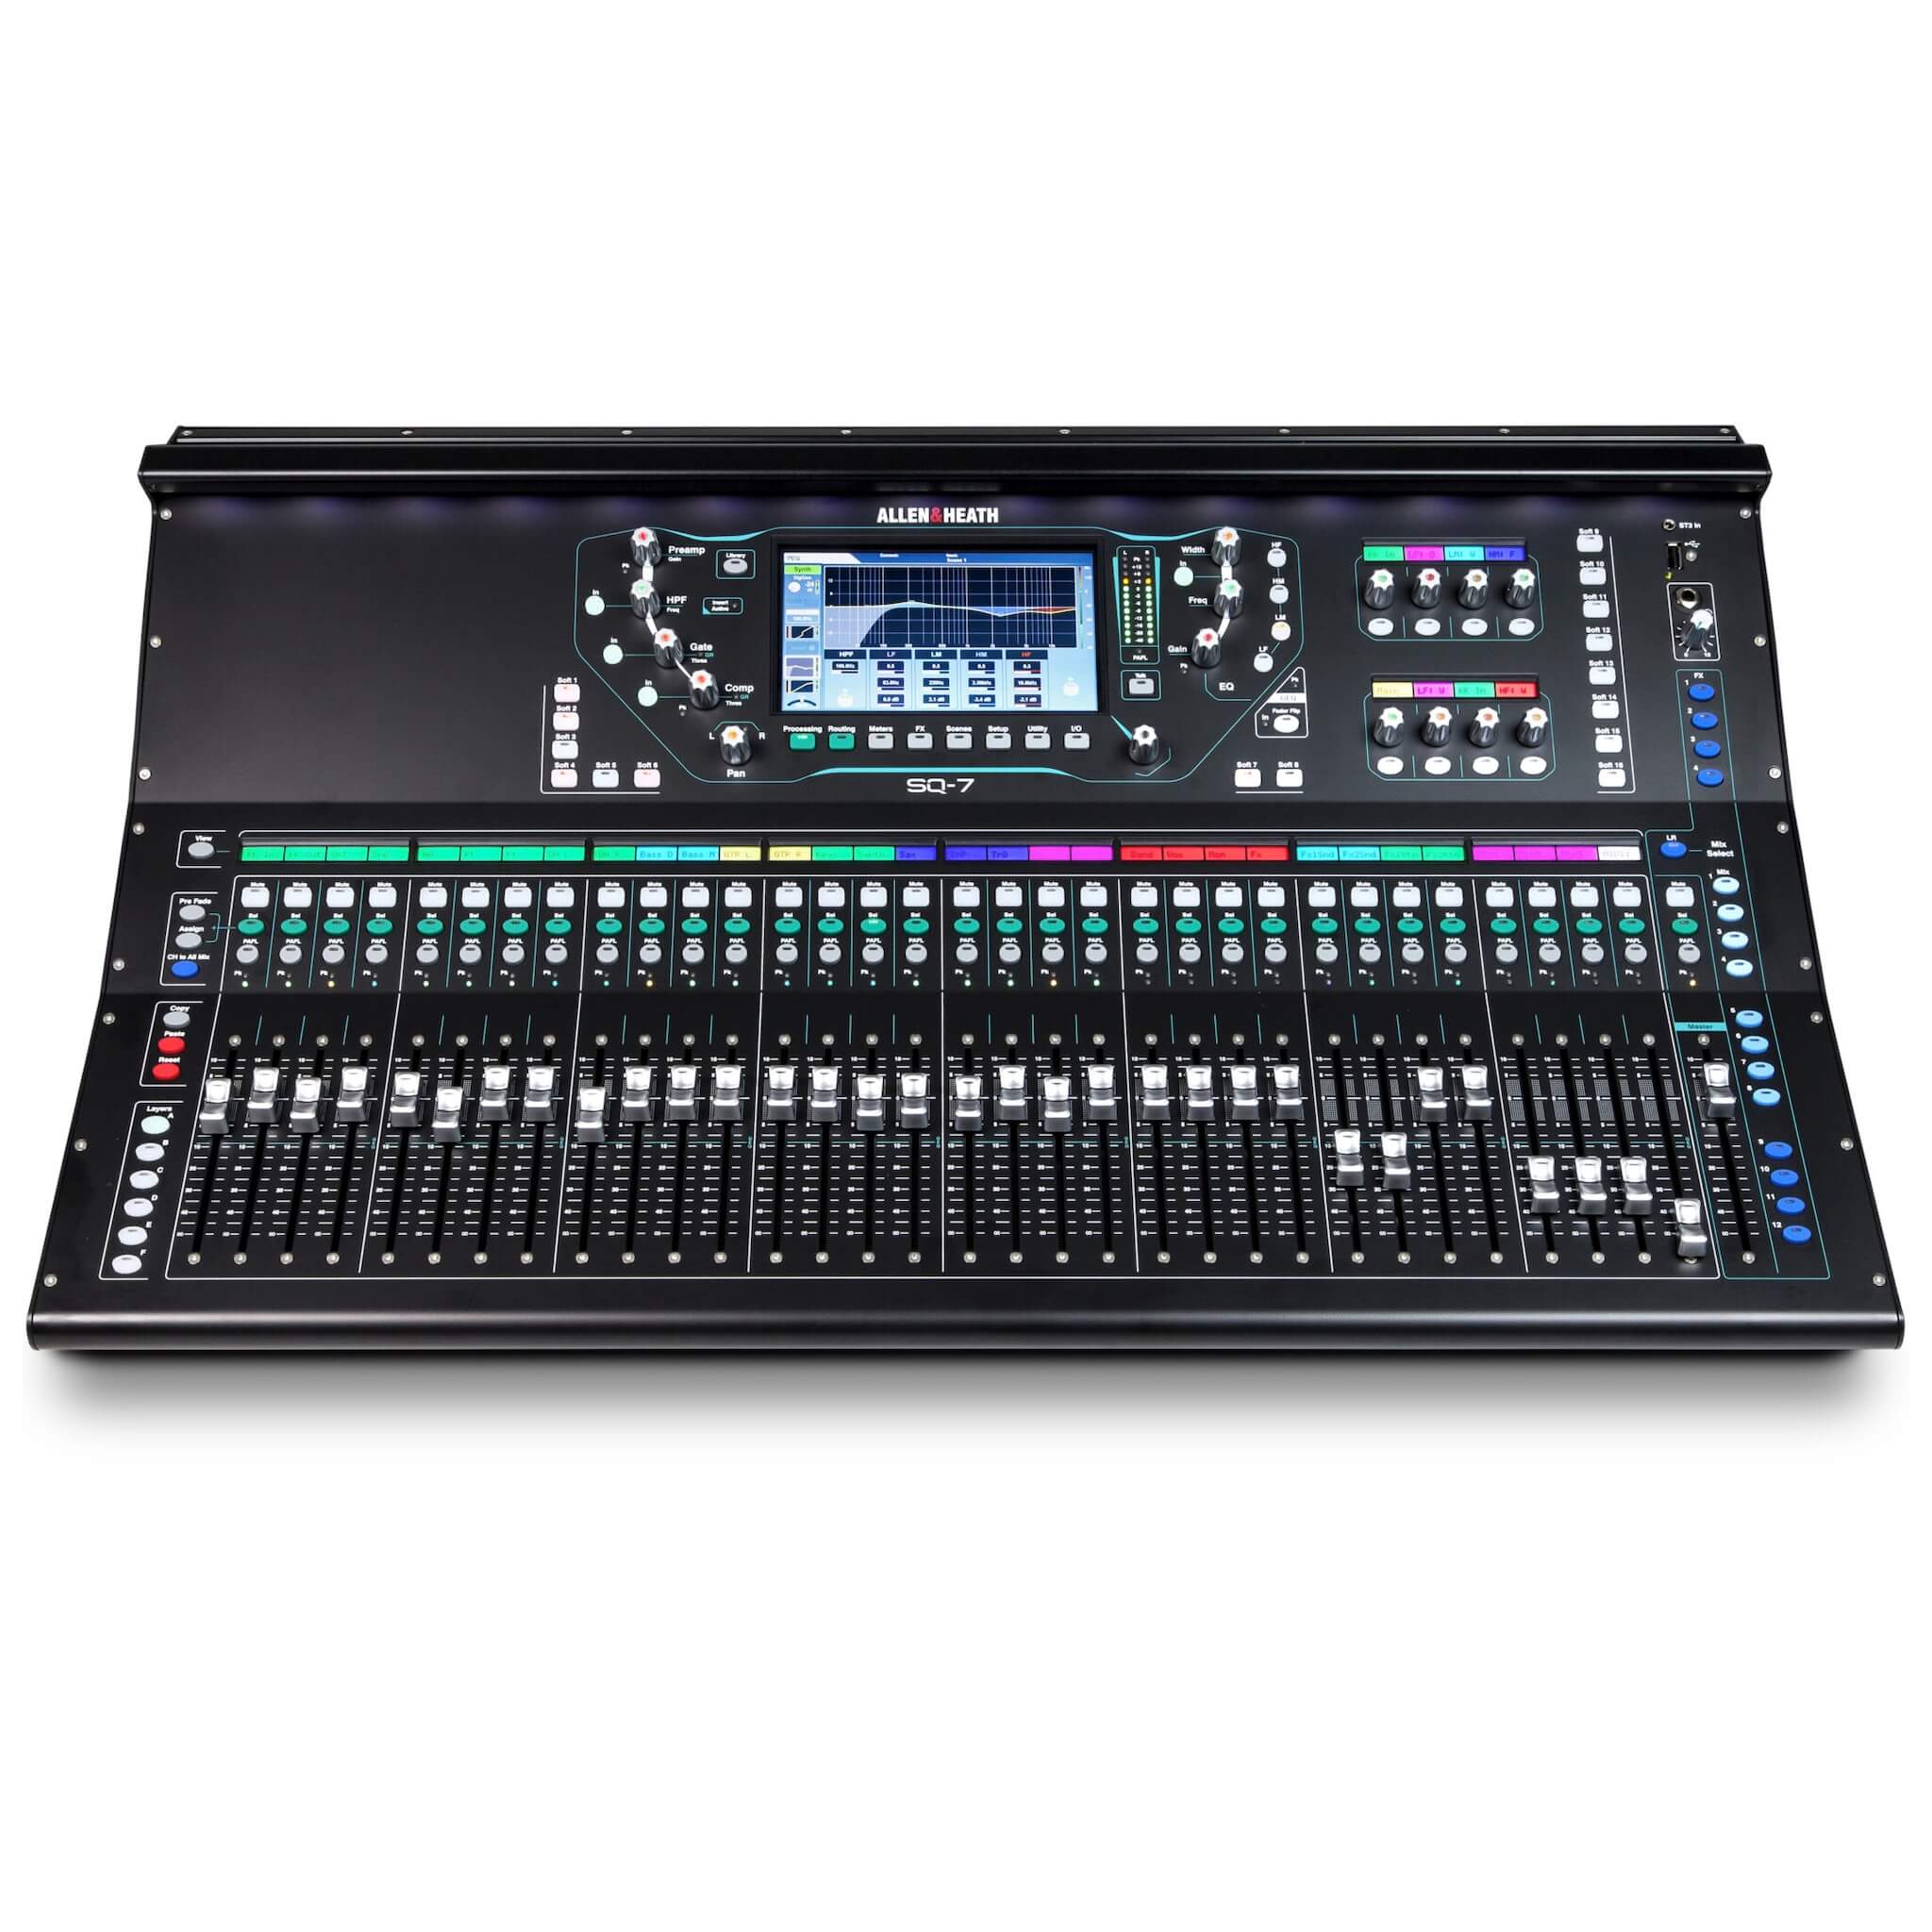 Allen & Heath SQ-7 48-channel Digital Mixer with 33 faders, front